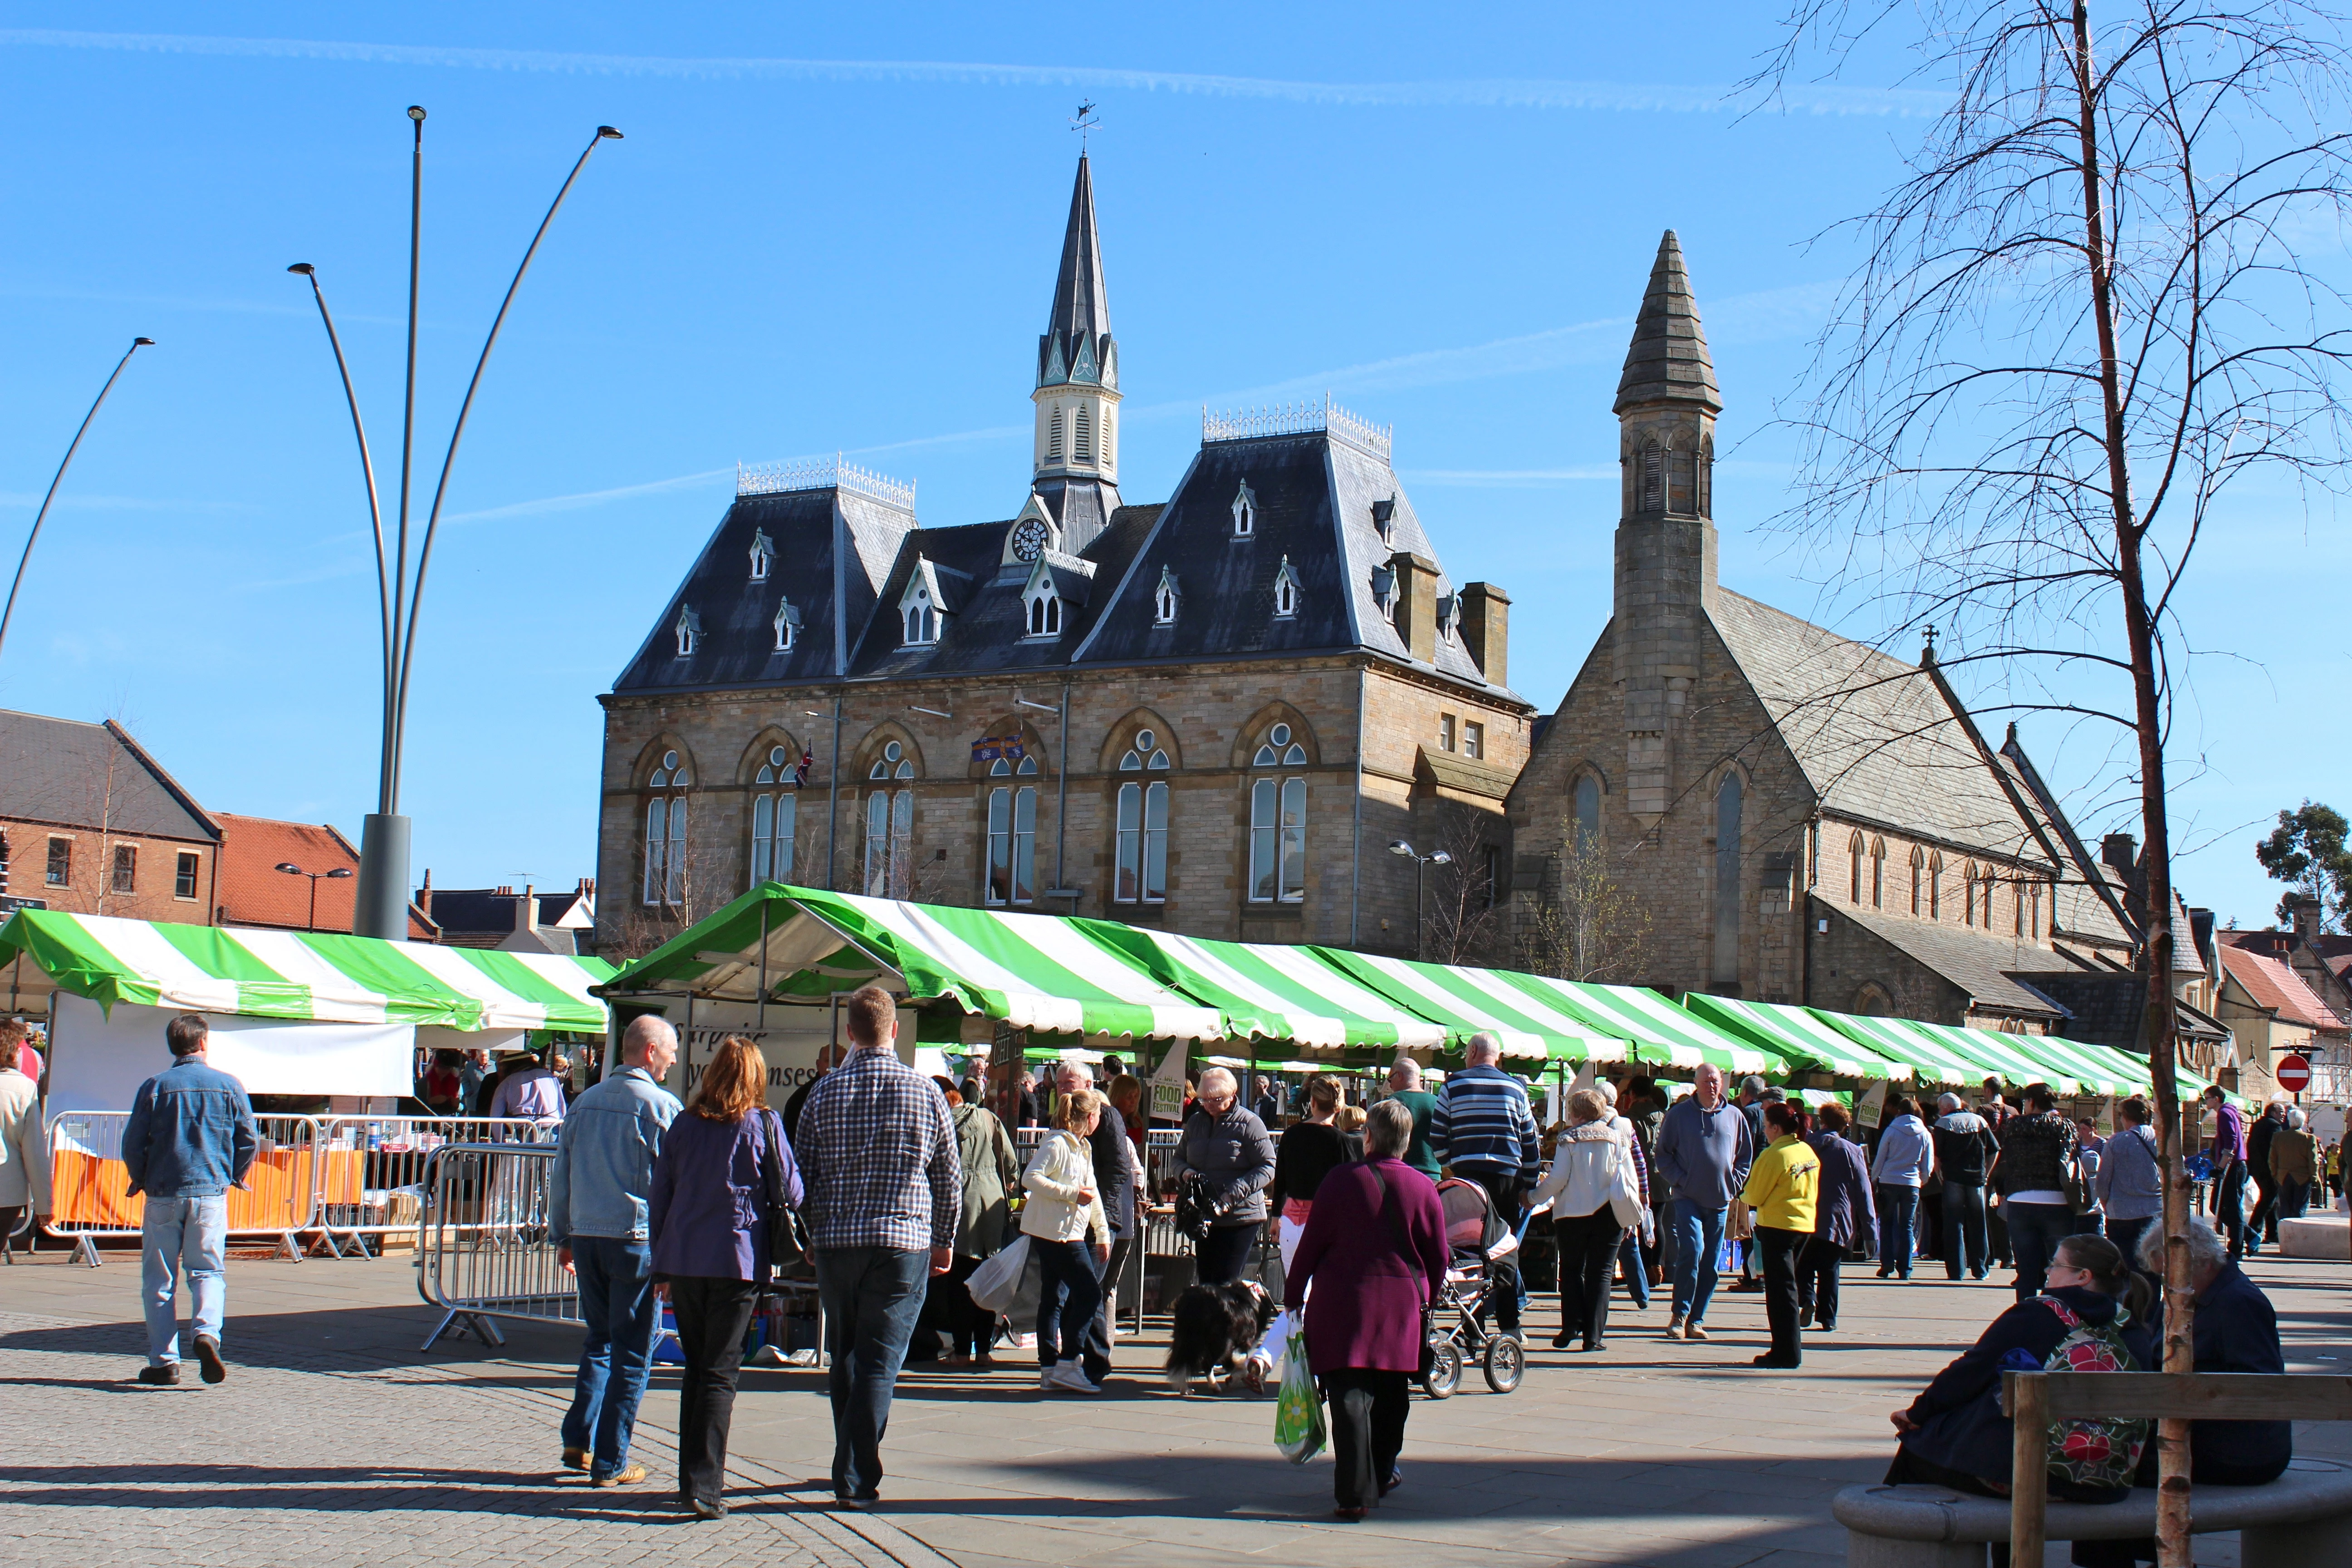 Food and arts on the Market Place